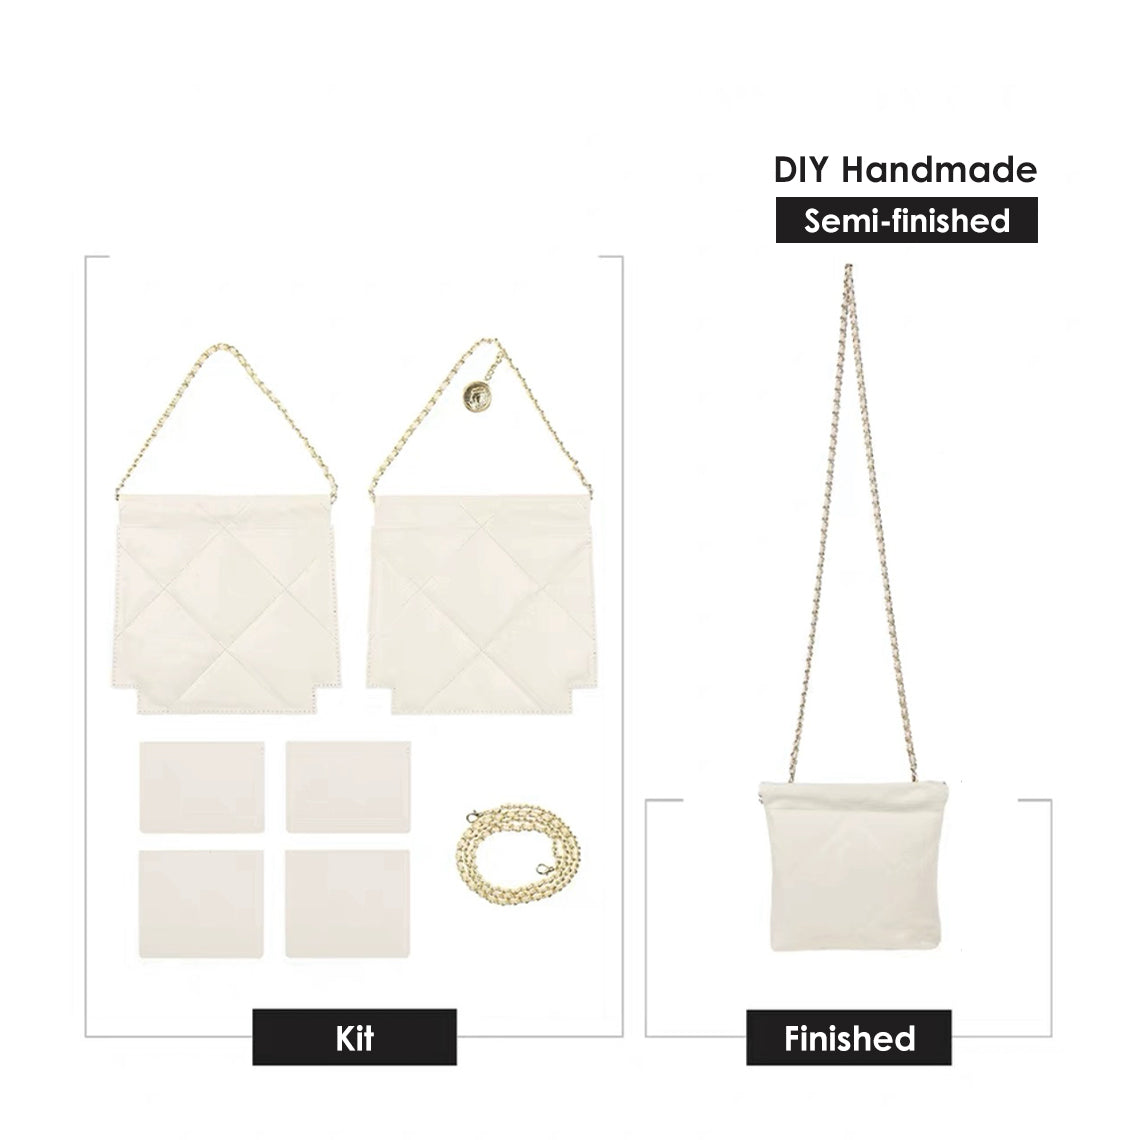 Quilted Leather Chain Bag DIY Kit | Sew Your Own Bag DIY Leather Kits